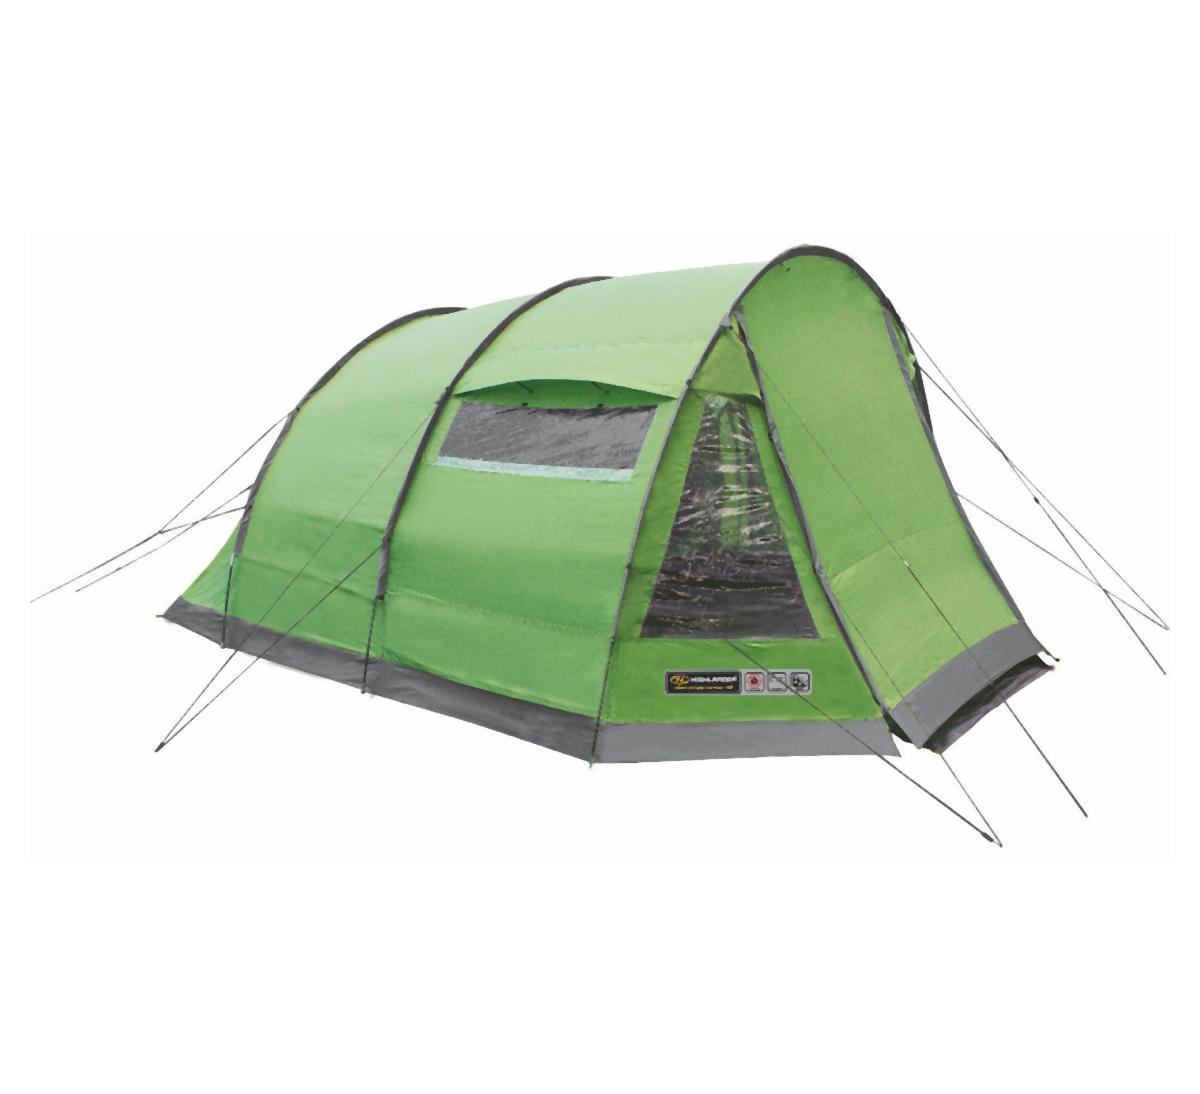 Highlander Sycamore 4 - Tunneltent - 4-Persoons - Groen